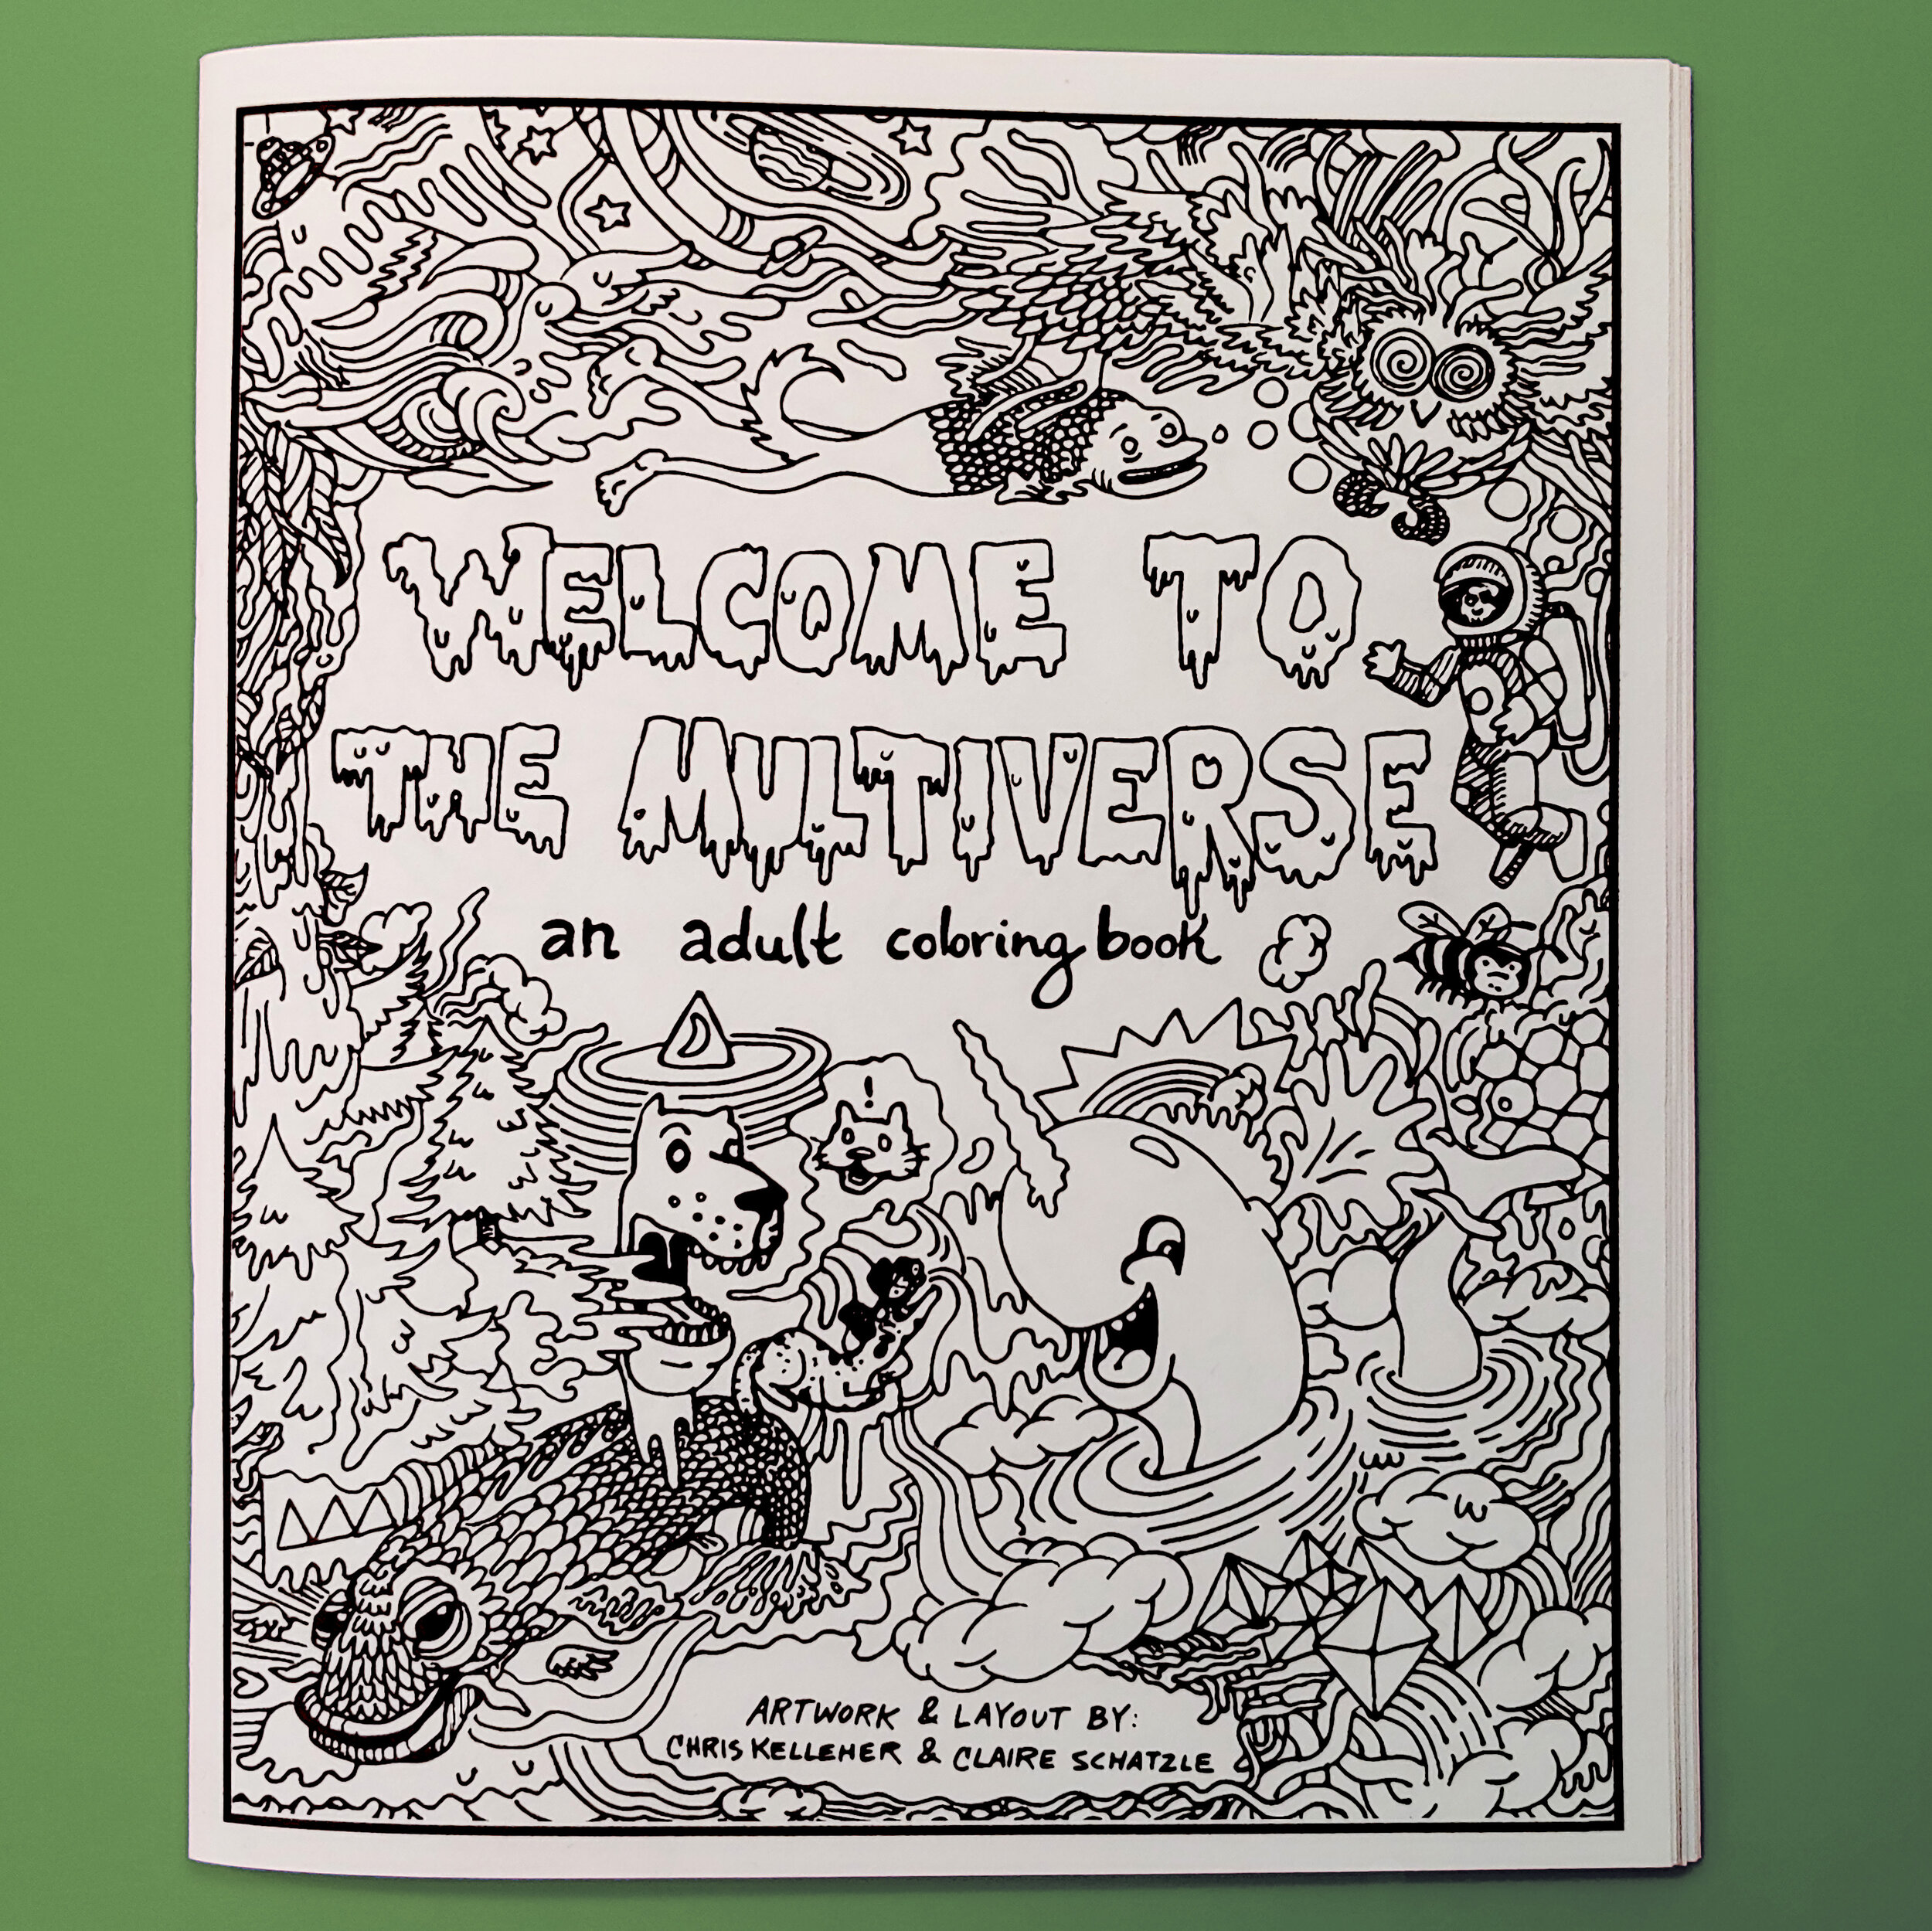 Welco to the multiverse an adult coloring book â